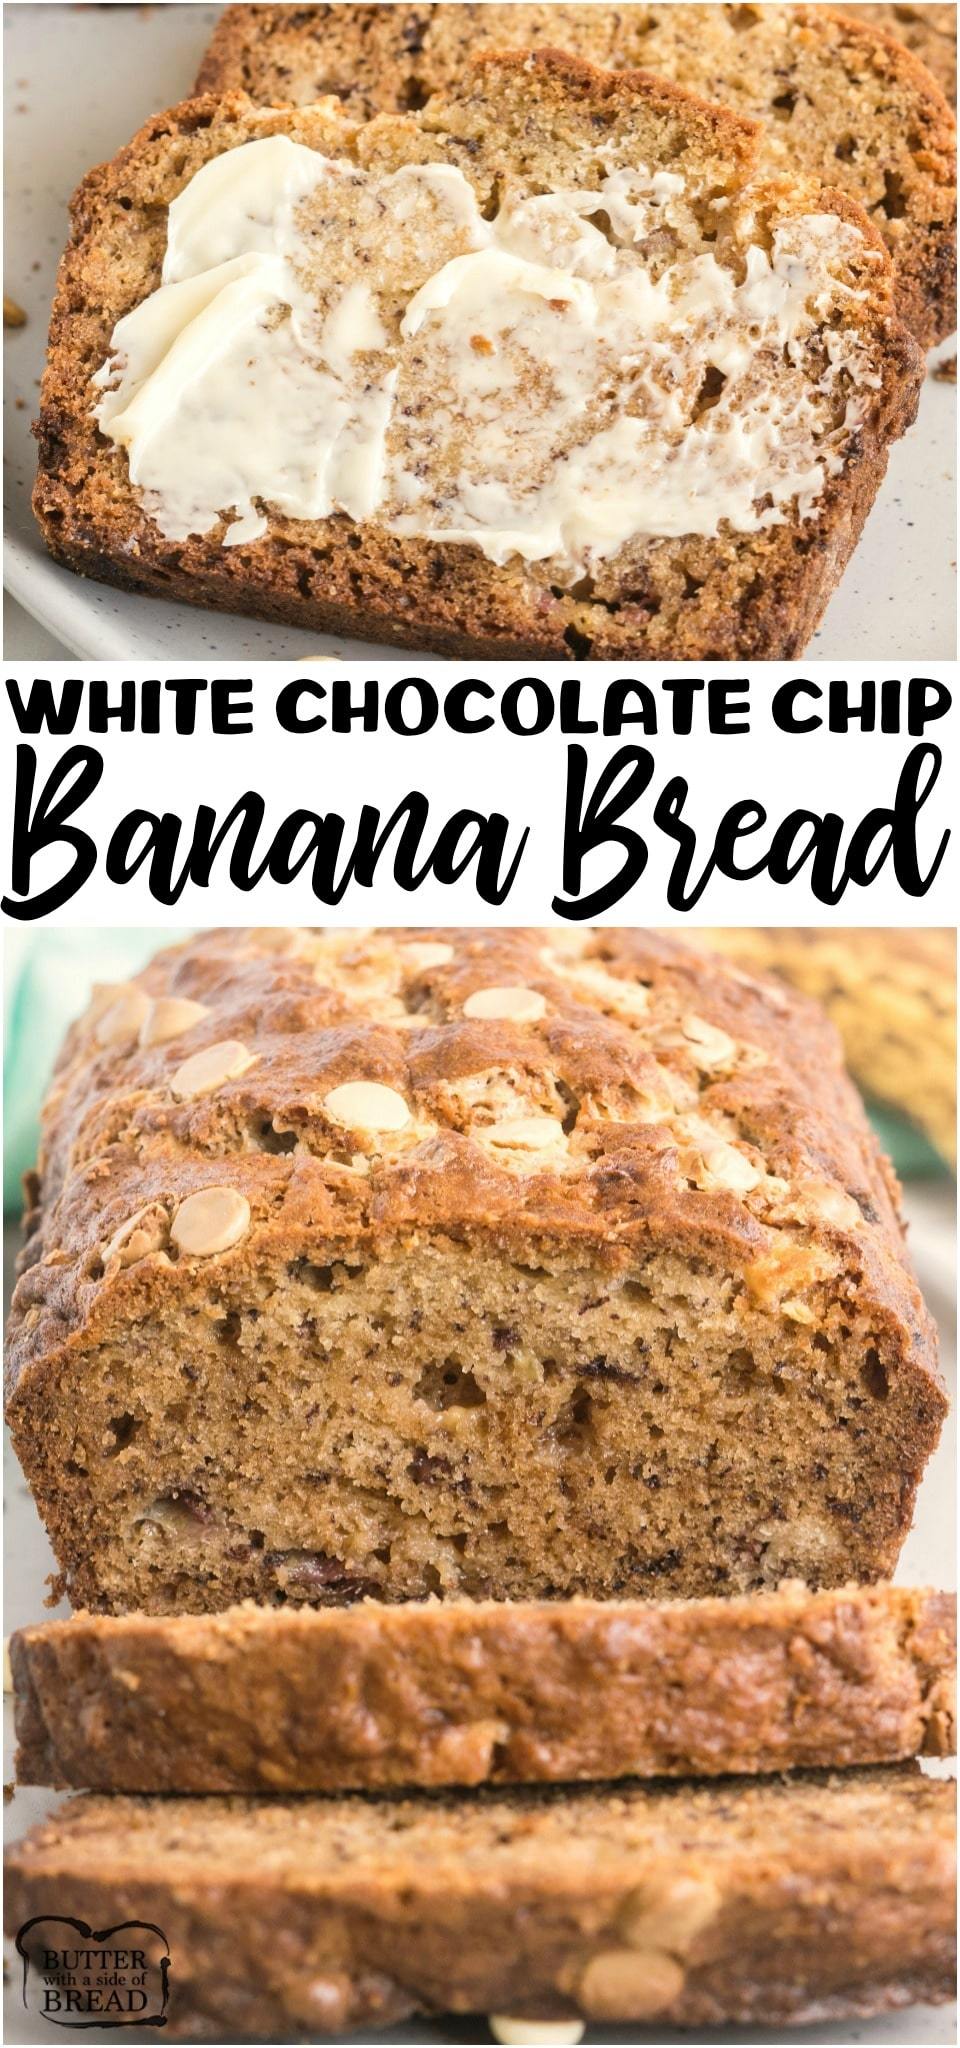 White Chocolate Chip Banana Bread is an incredible variation on classic banana bread! Sweet white chocolate and banana blending together to create an amazing banana bread recipe you need to try! #bread #banana #bananabread #baking #homemade #breadrecipe from BUTTER WITH A SIDE OF BREAD